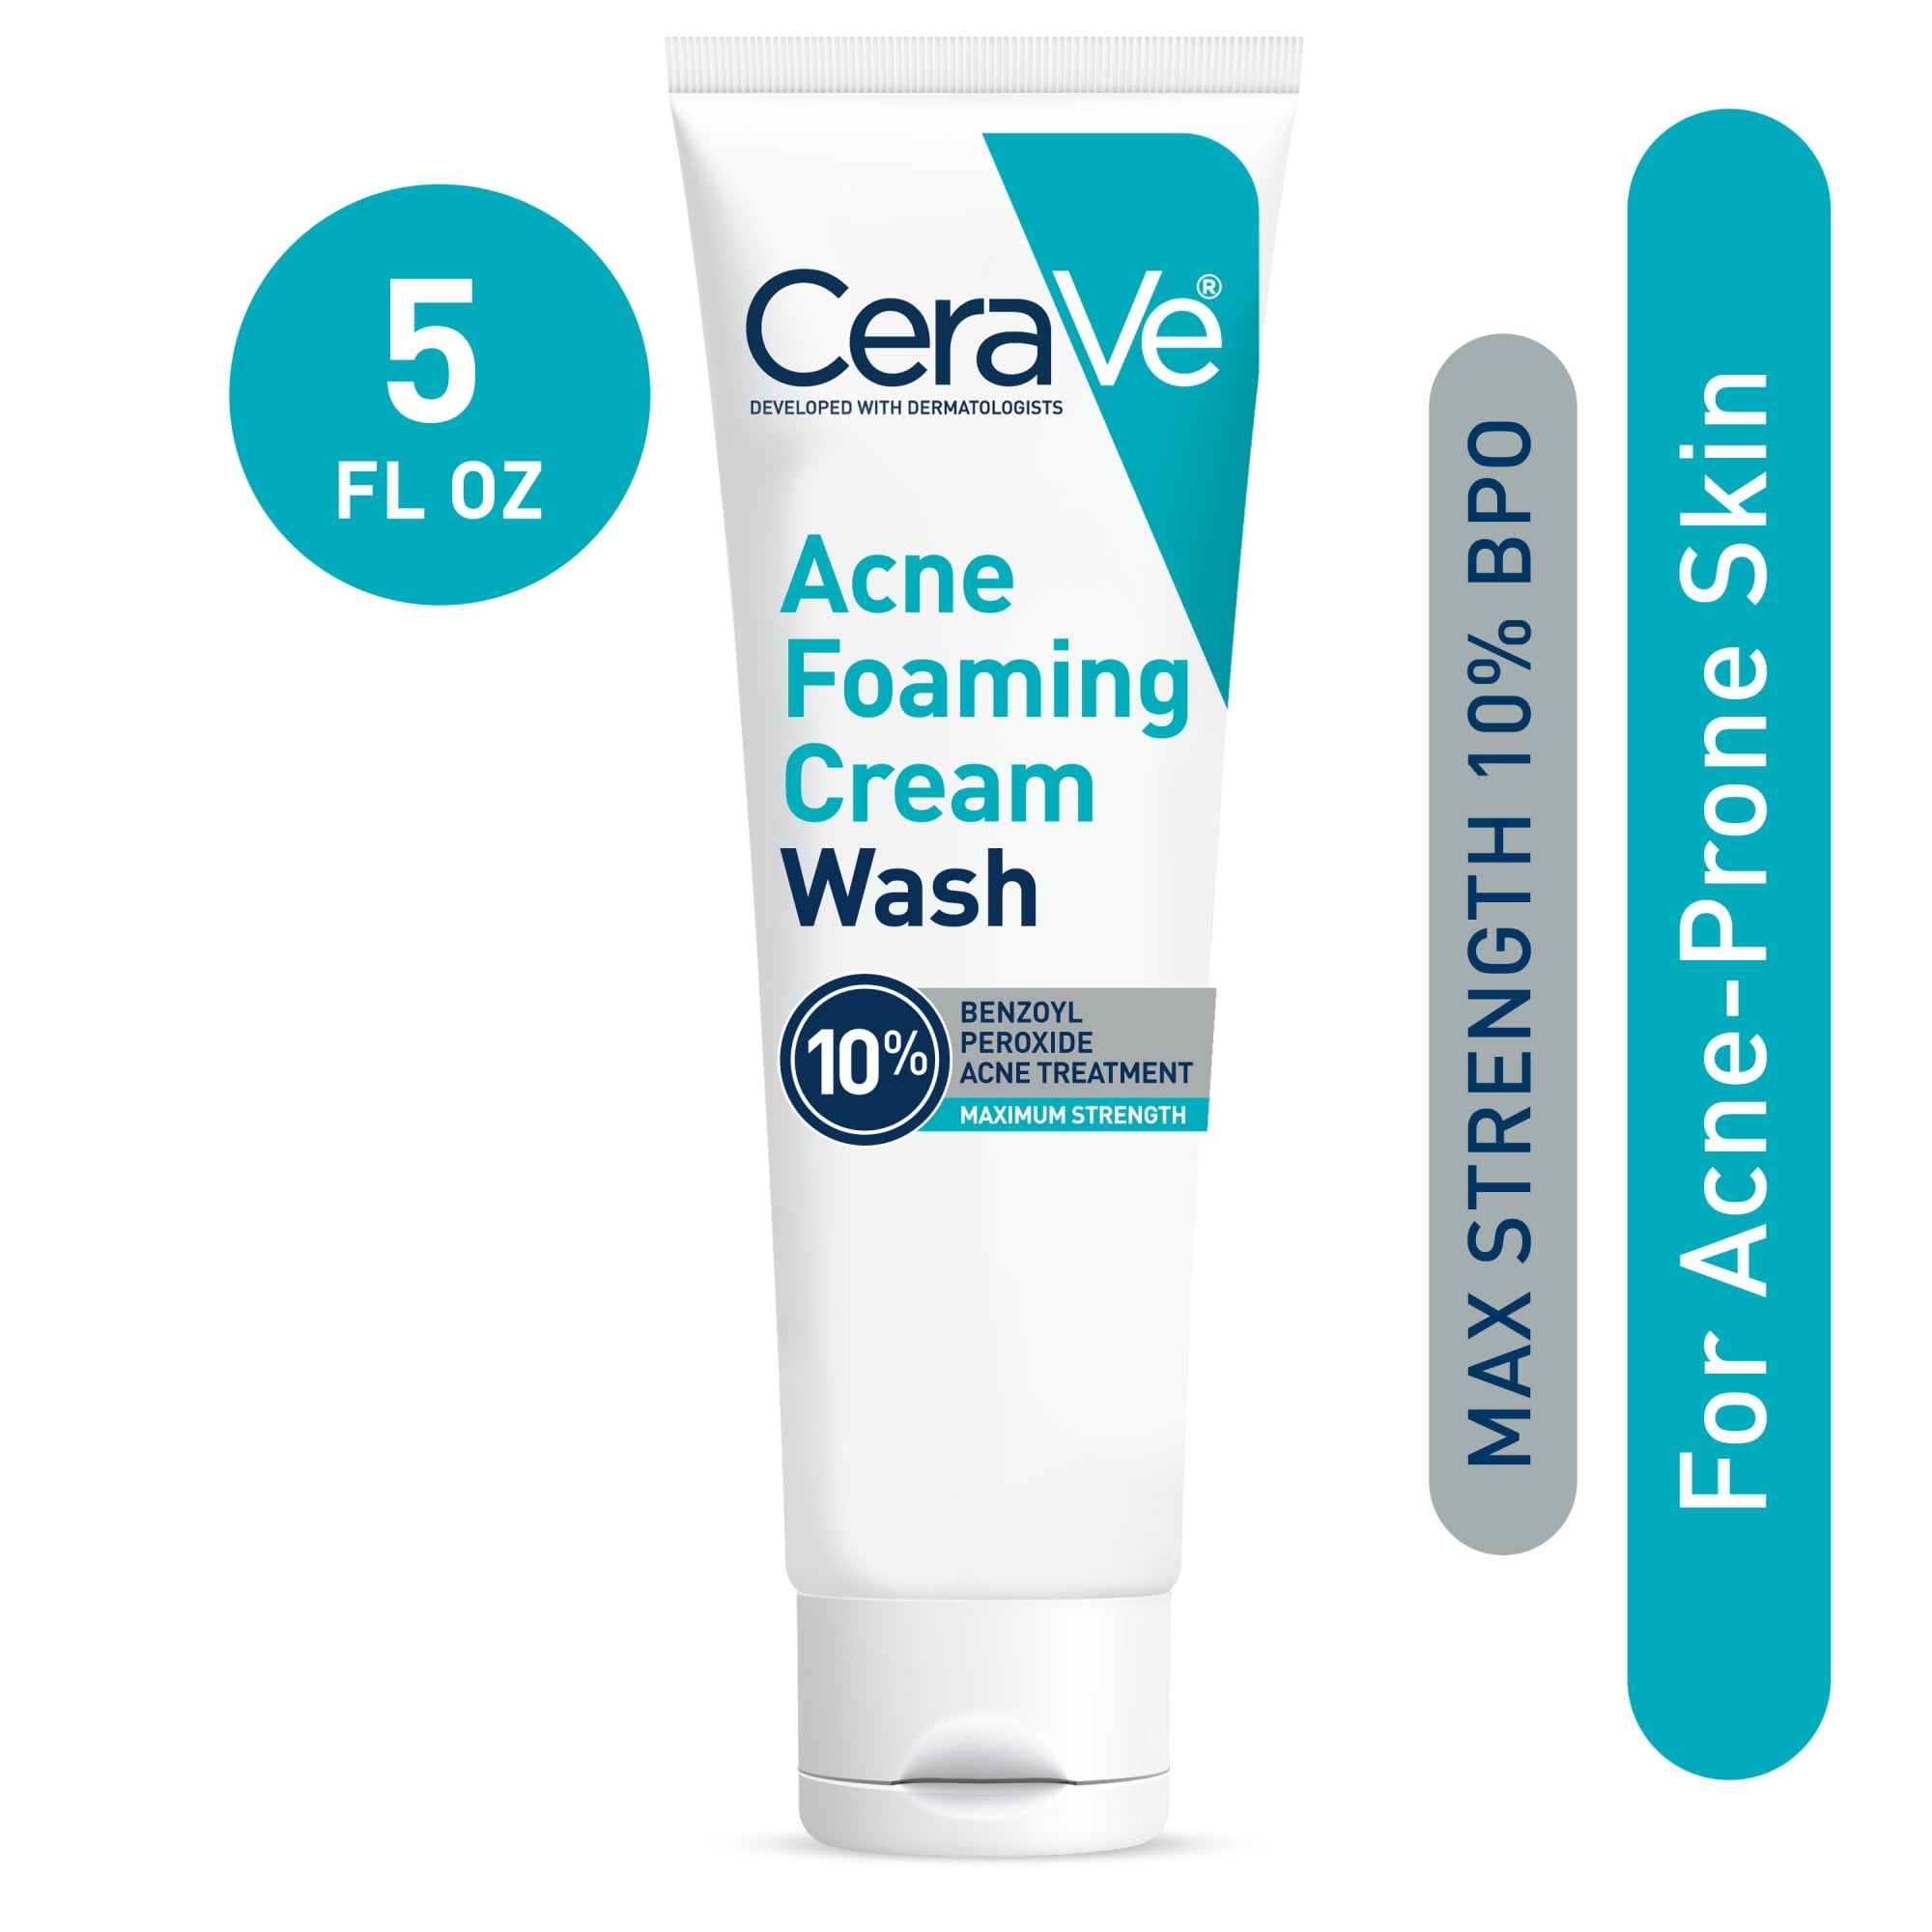  CeraVe Acne Foaming Cream Cleanser, Acne Treatment Face Wash  with 4% Benzoyl Peroxide, Hyaluronic Acid, and Niacinamide, Cream to Foam  Formula, Fragrance Free & Non Comedogenic